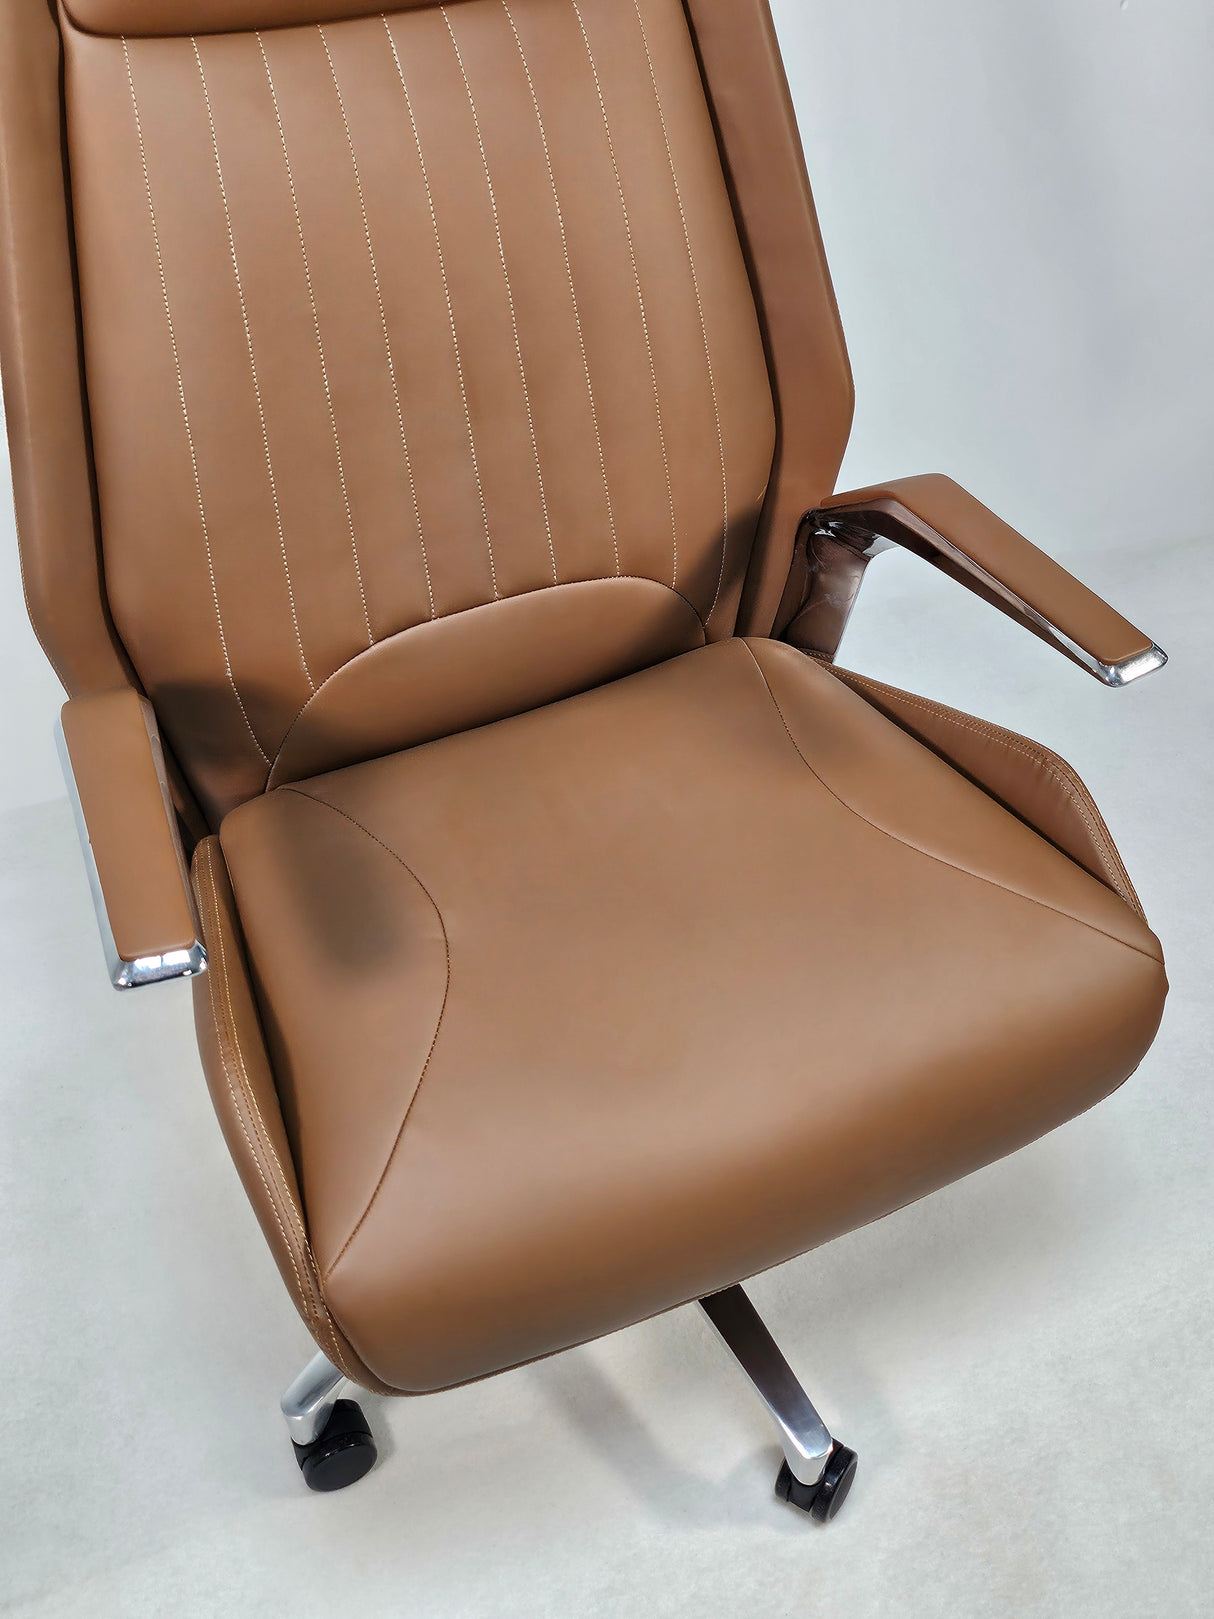 Quality Modern Heavy Duty Office Chair in Tan Leather - DT-8530